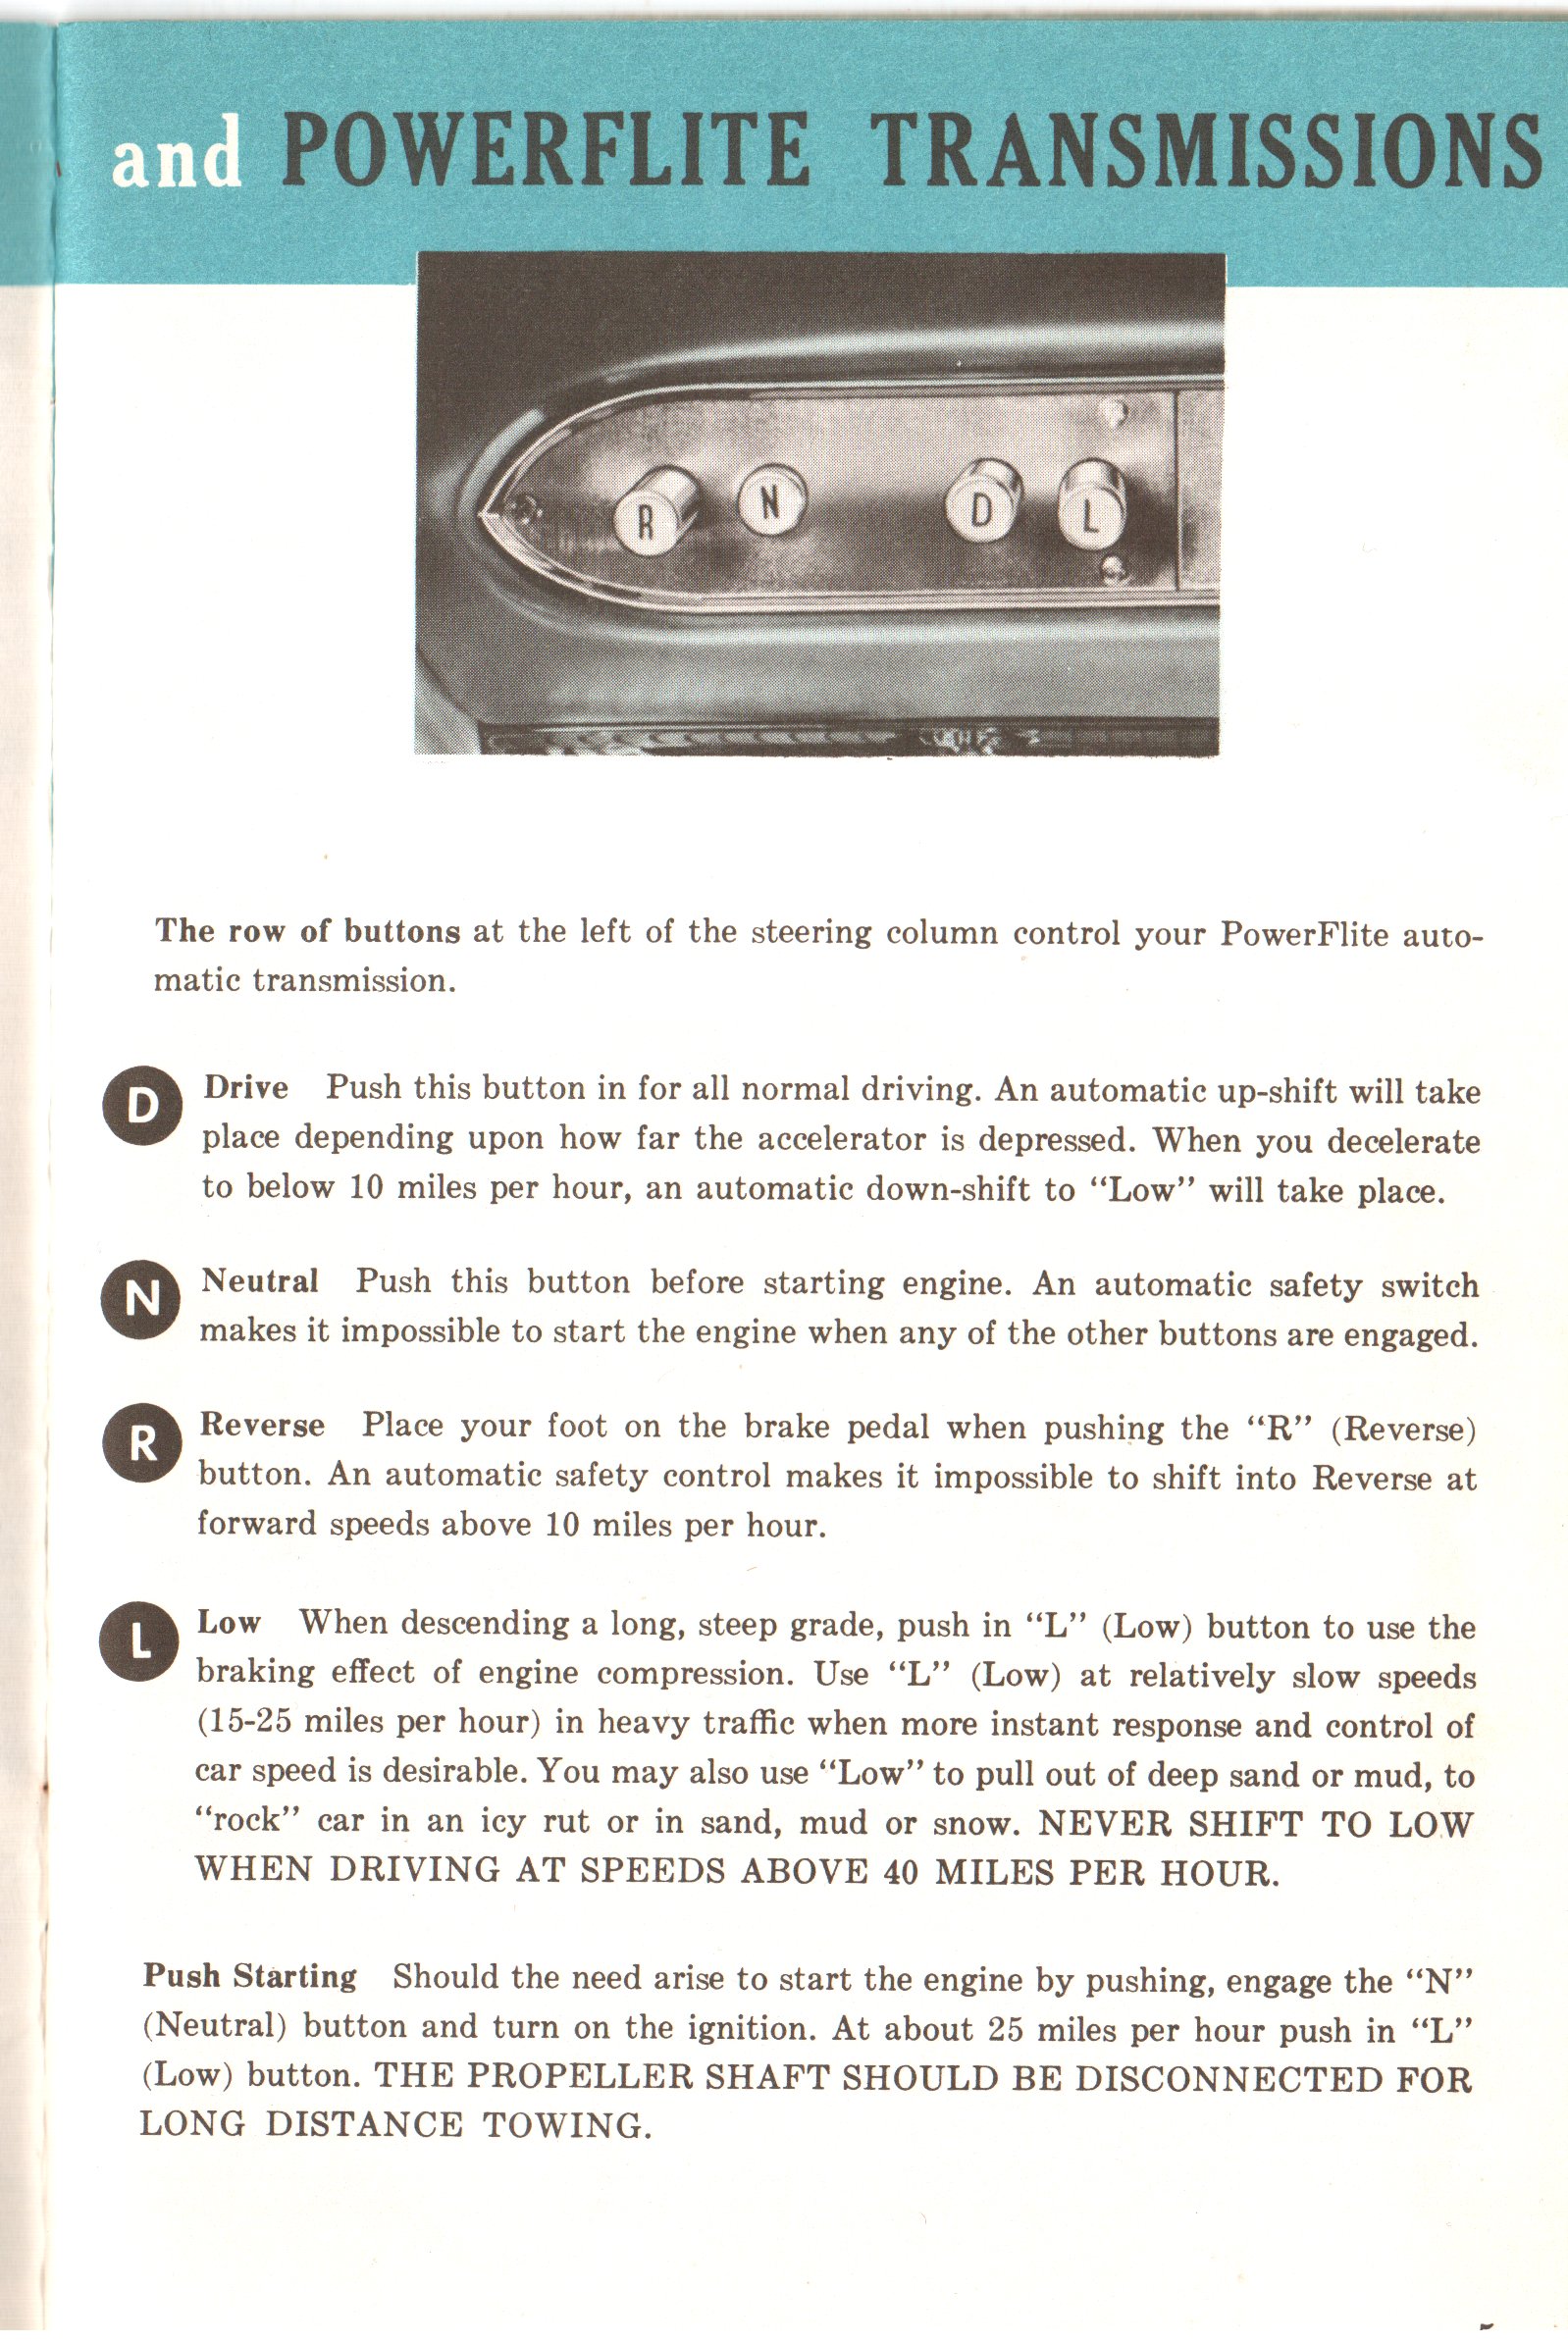 1960_Plymouth_Owners_Manual-05